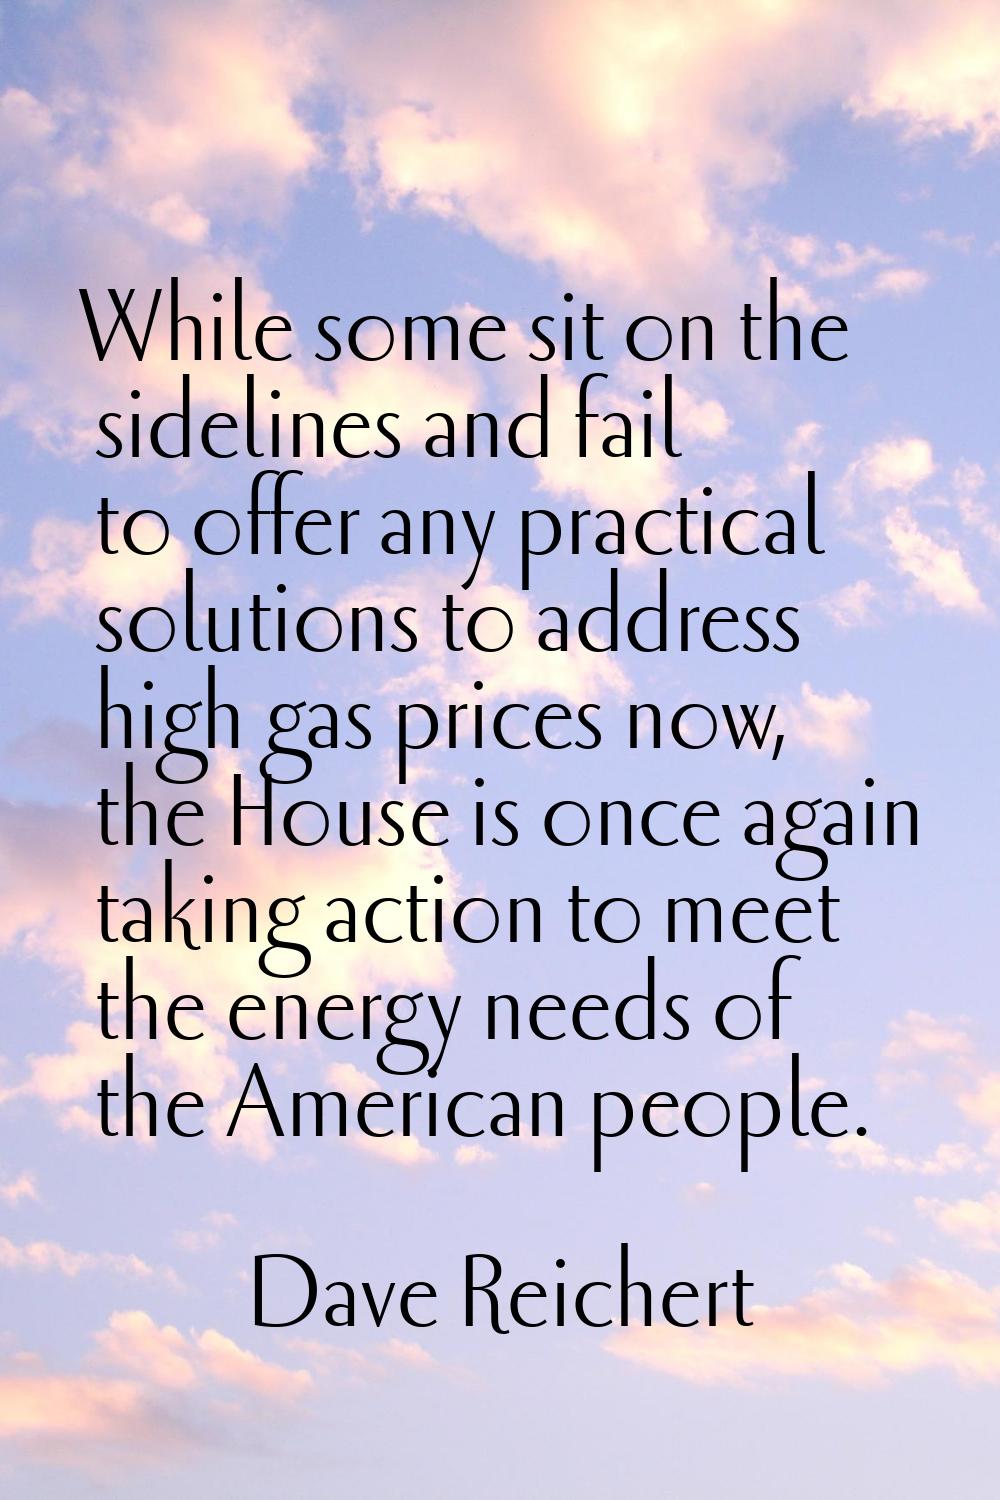 While some sit on the sidelines and fail to offer any practical solutions to address high gas price